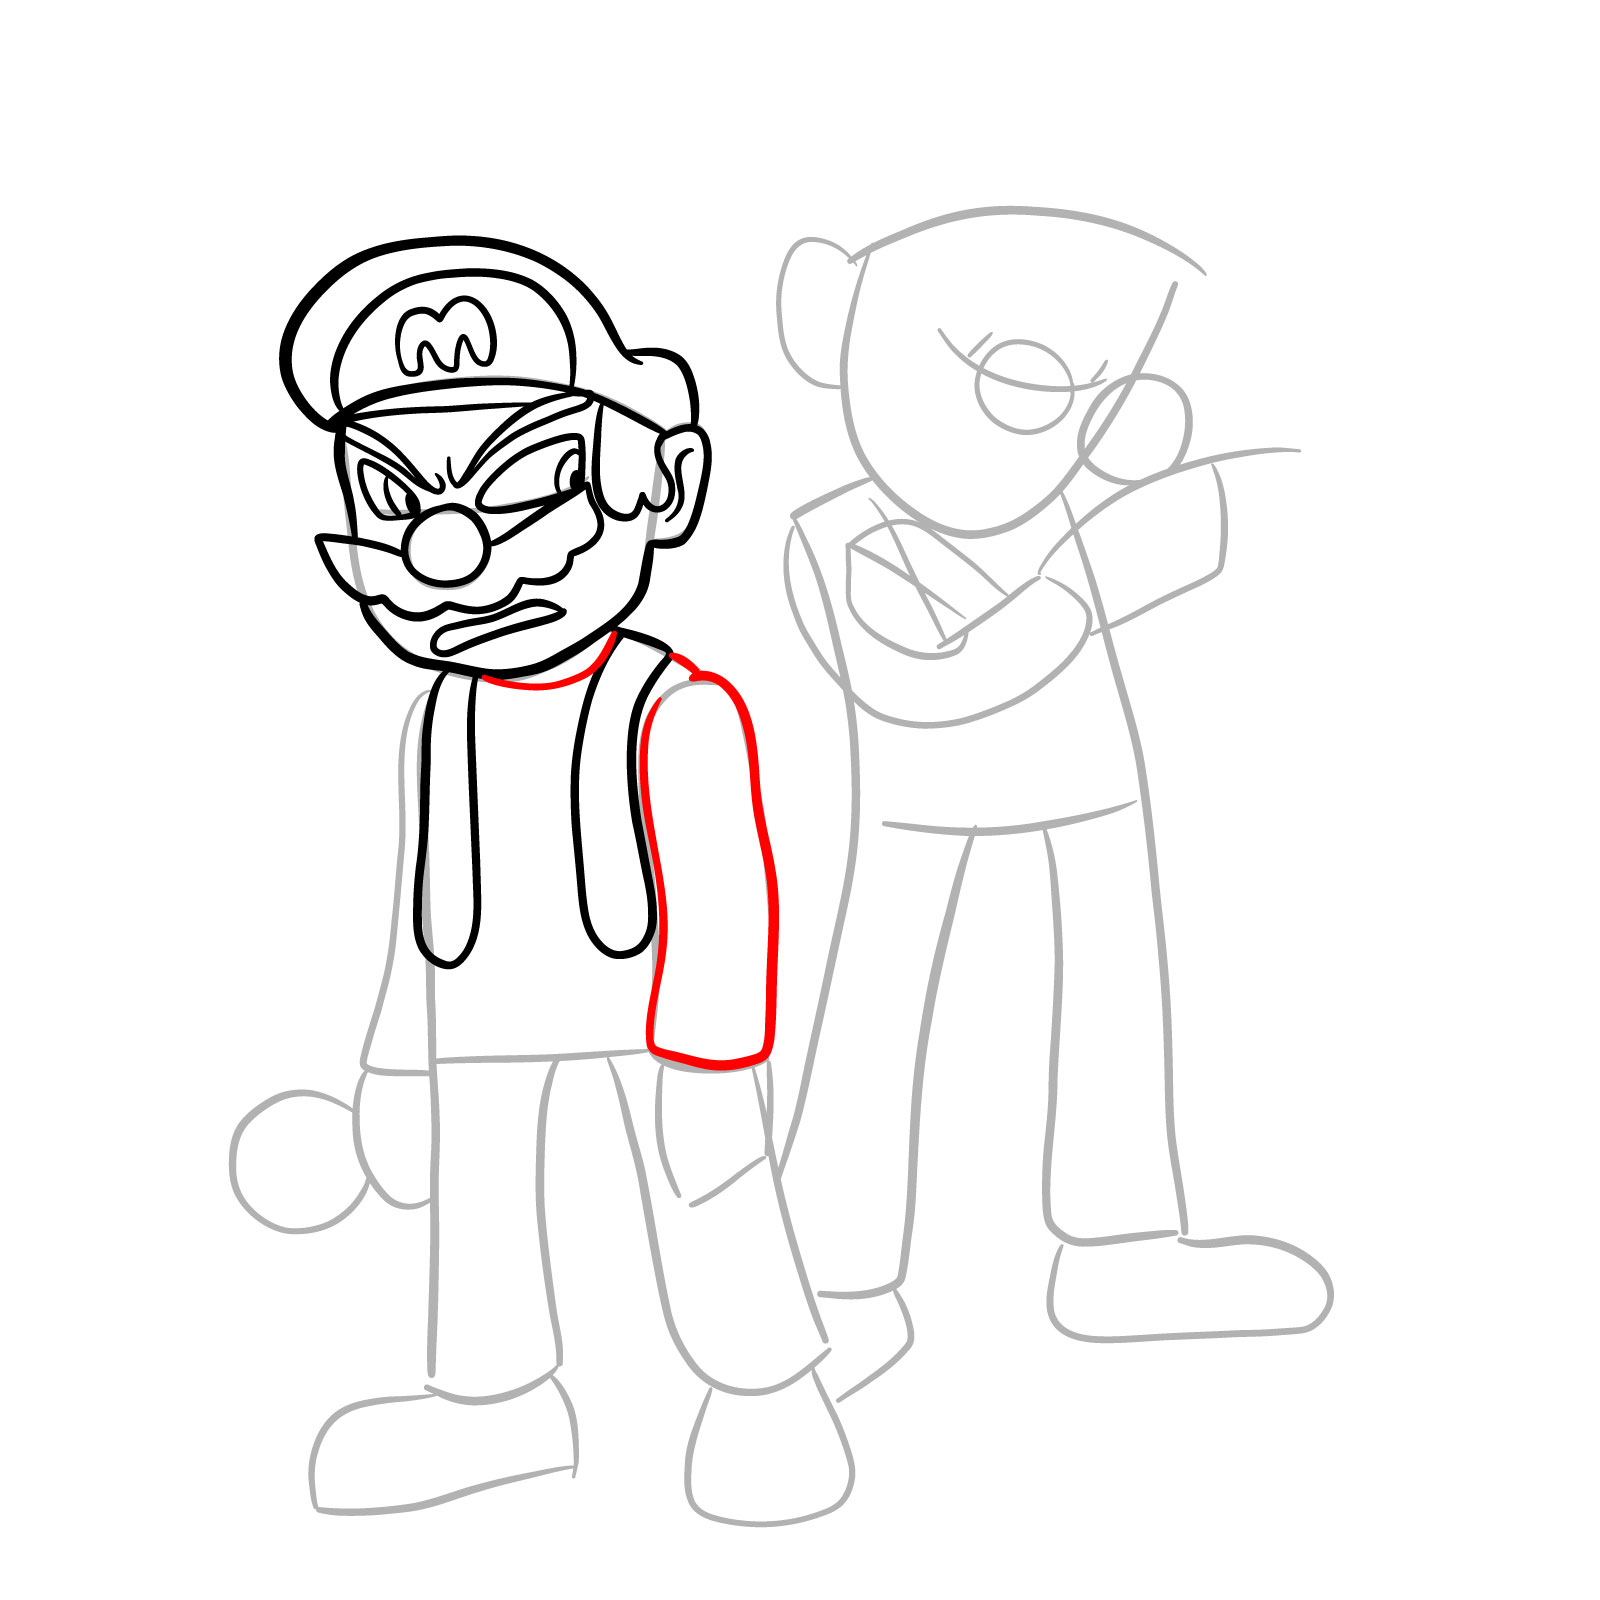 How to draw Mario and Luigi from Tails Gets Trolled - step 14